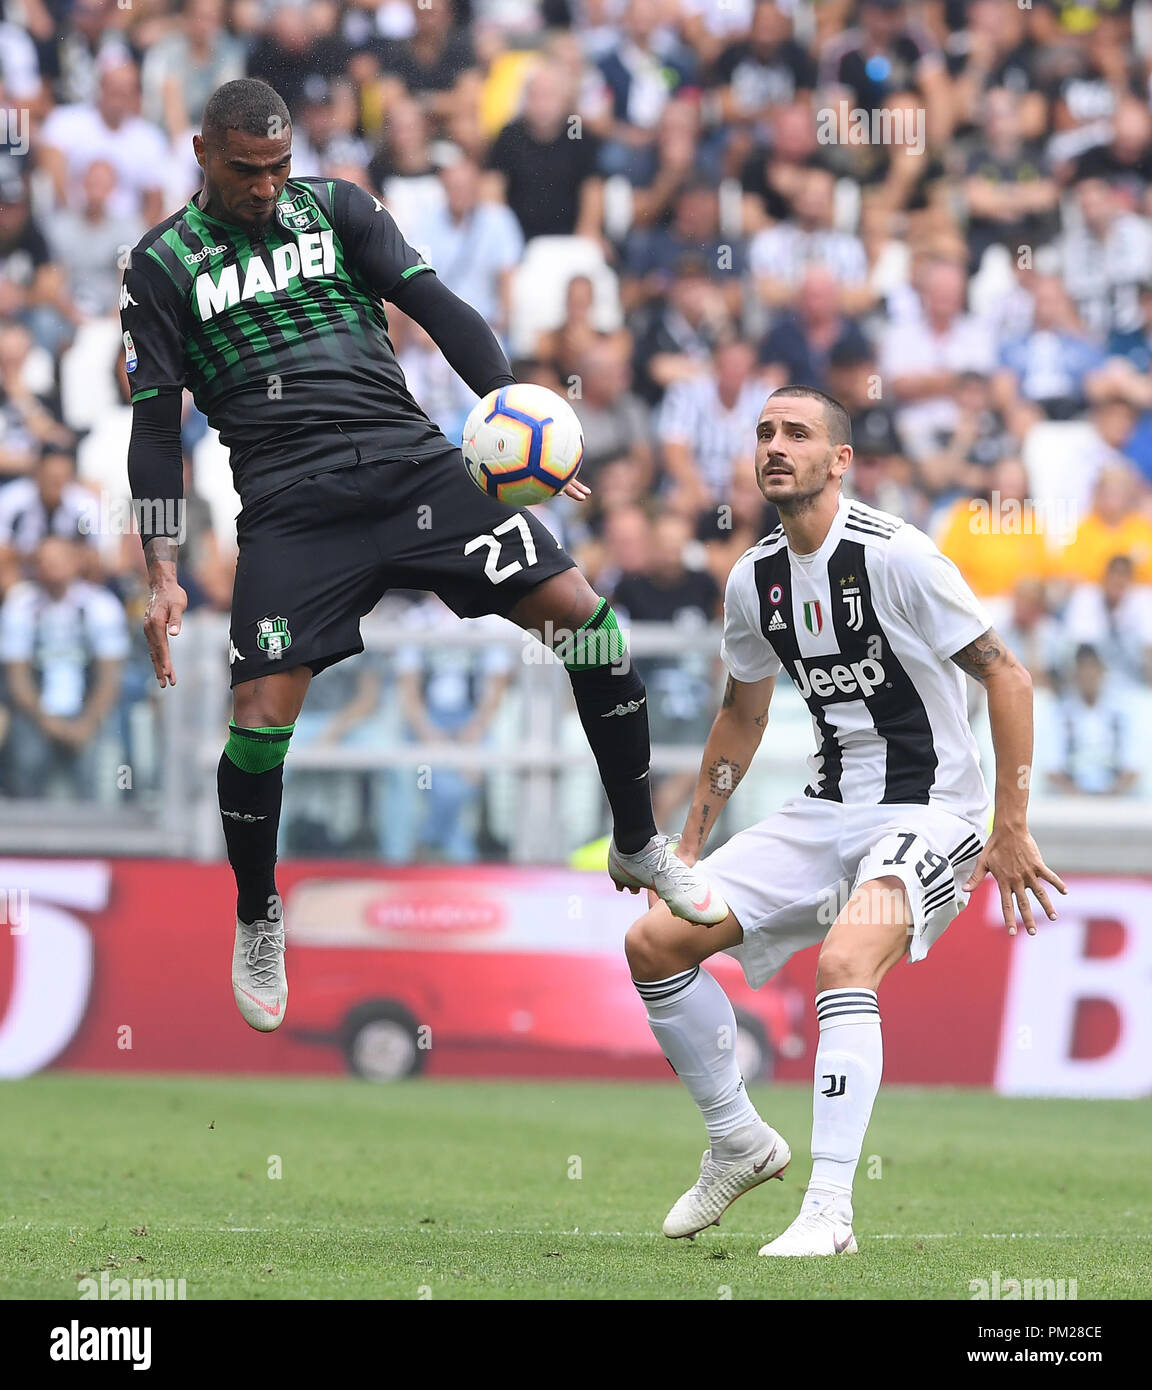 Turin, Italy. 16th Sep, 2018. FC Juventus' Leonardo Bonucci (R) vies with Sassuolo's Prince Boateng during the Serie A soccer match between FC Juventus and Sassuolo in Turin, Italy, Sept. 16, 2018. FC Juventus won 2-1. Credit: Alberto Lingria/Xinhua/Alamy Live News Stock Photo